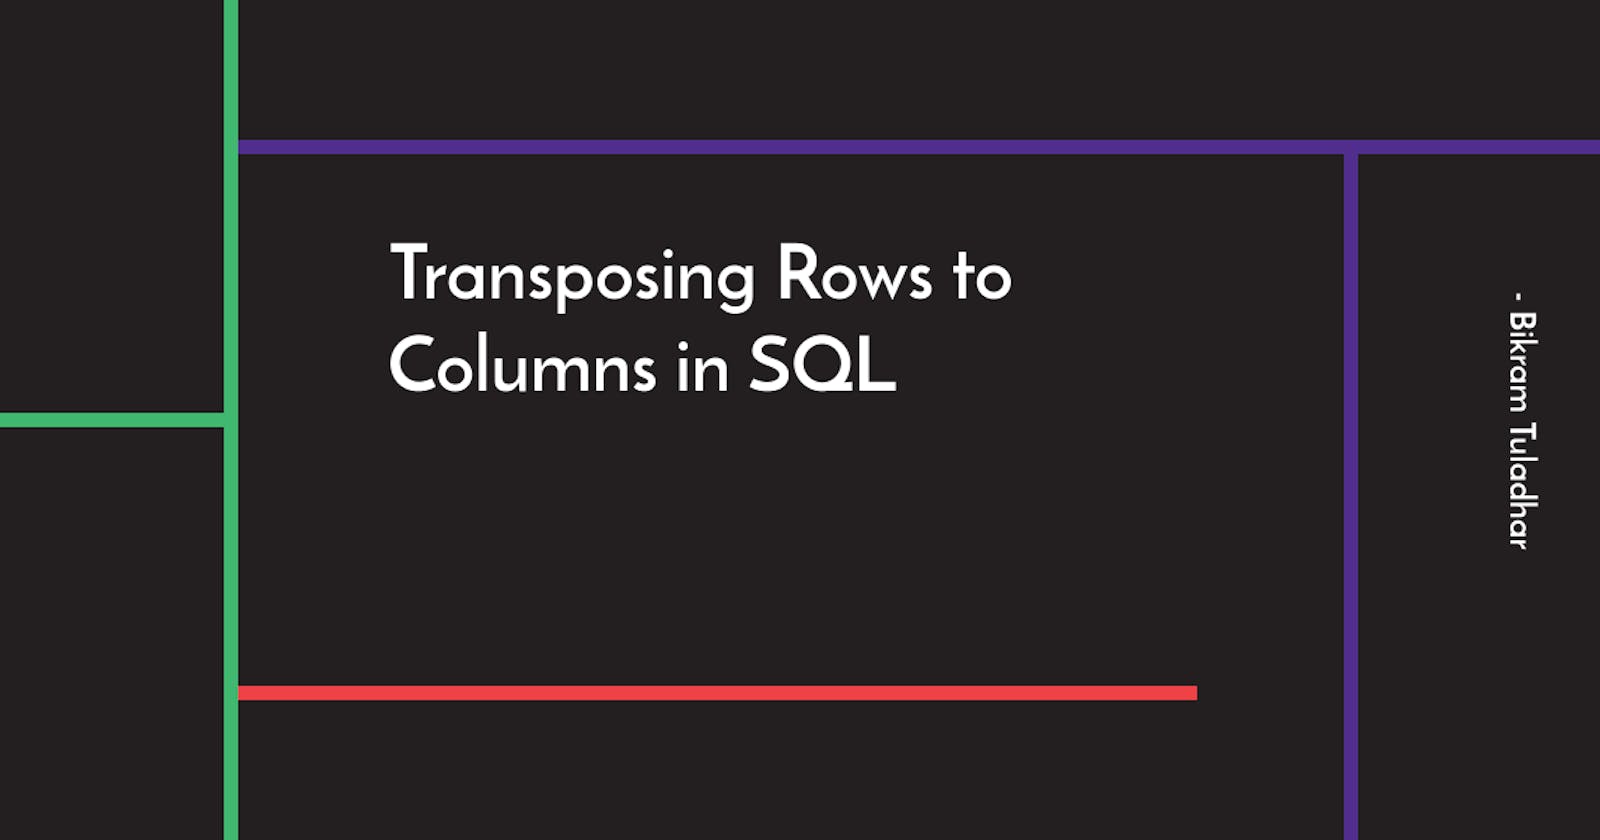 Transposing Rows to Columns in SQL